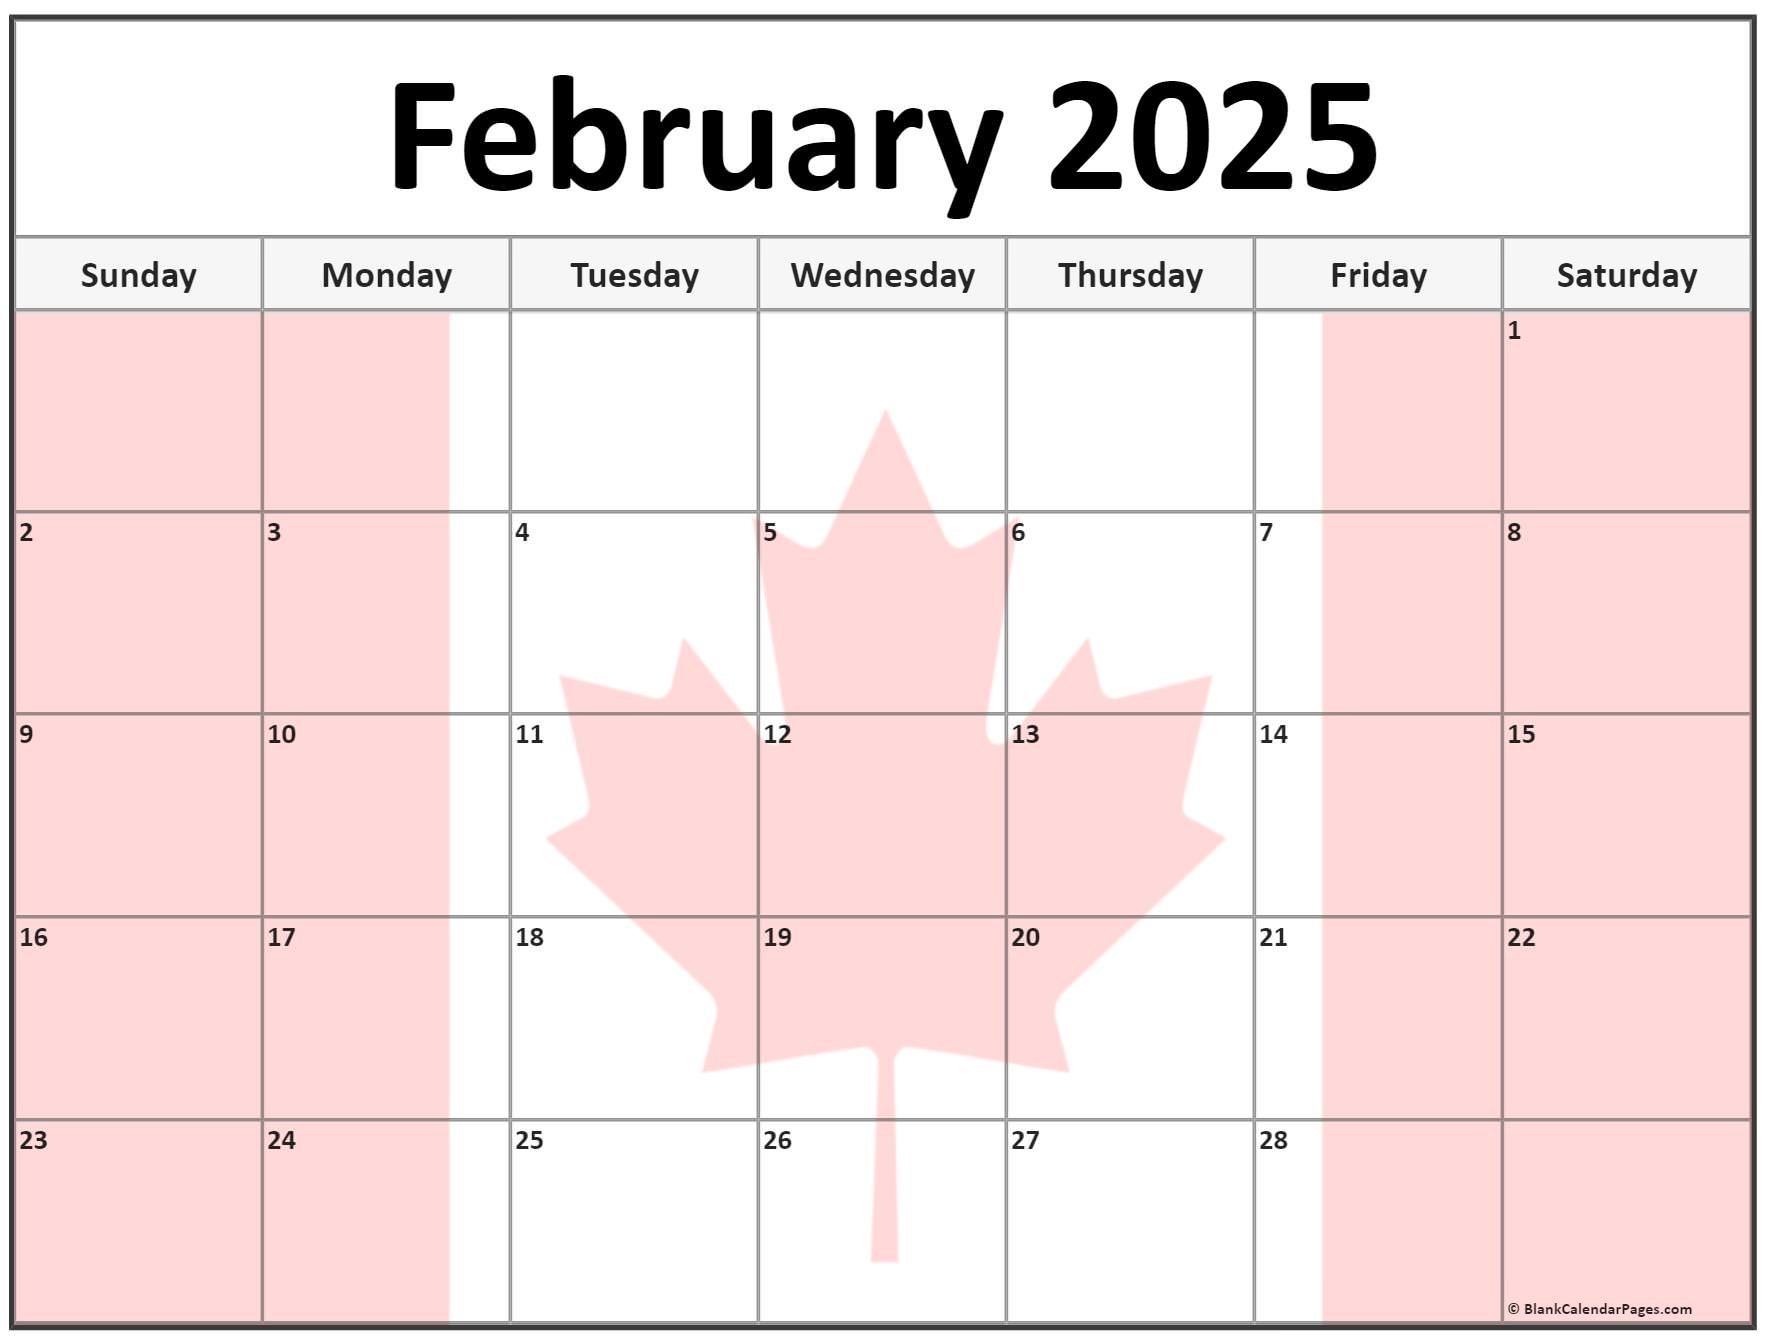 collection-of-february-2025-photo-calendars-with-image-filters